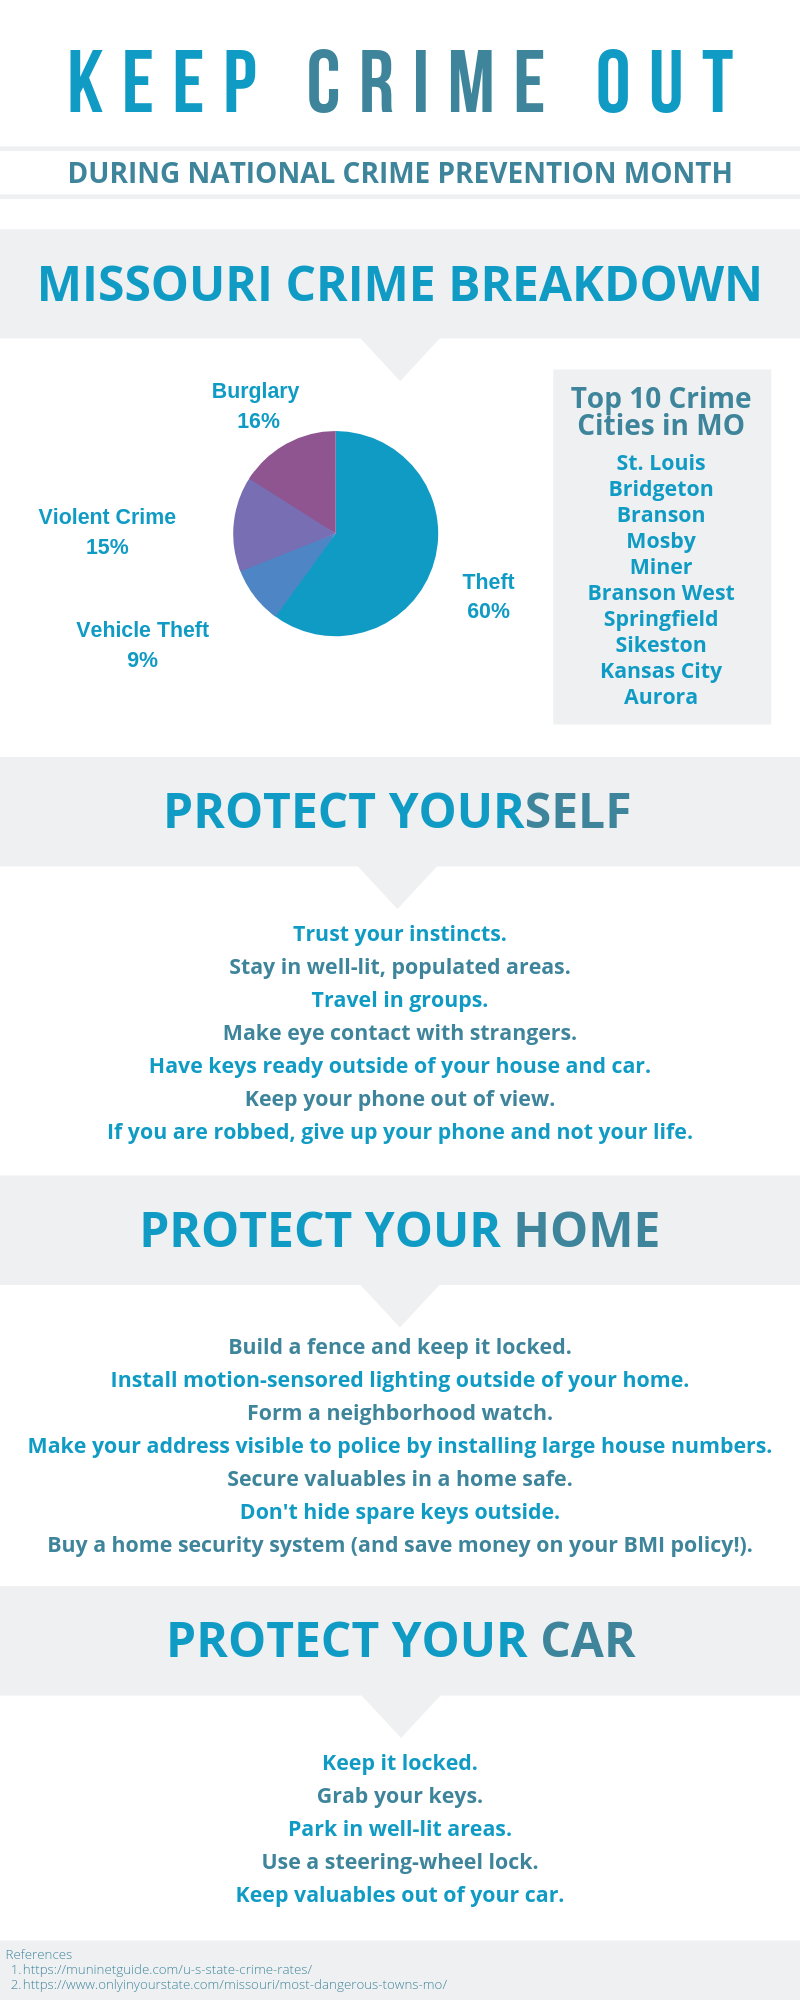 Keep Crime Out infographic